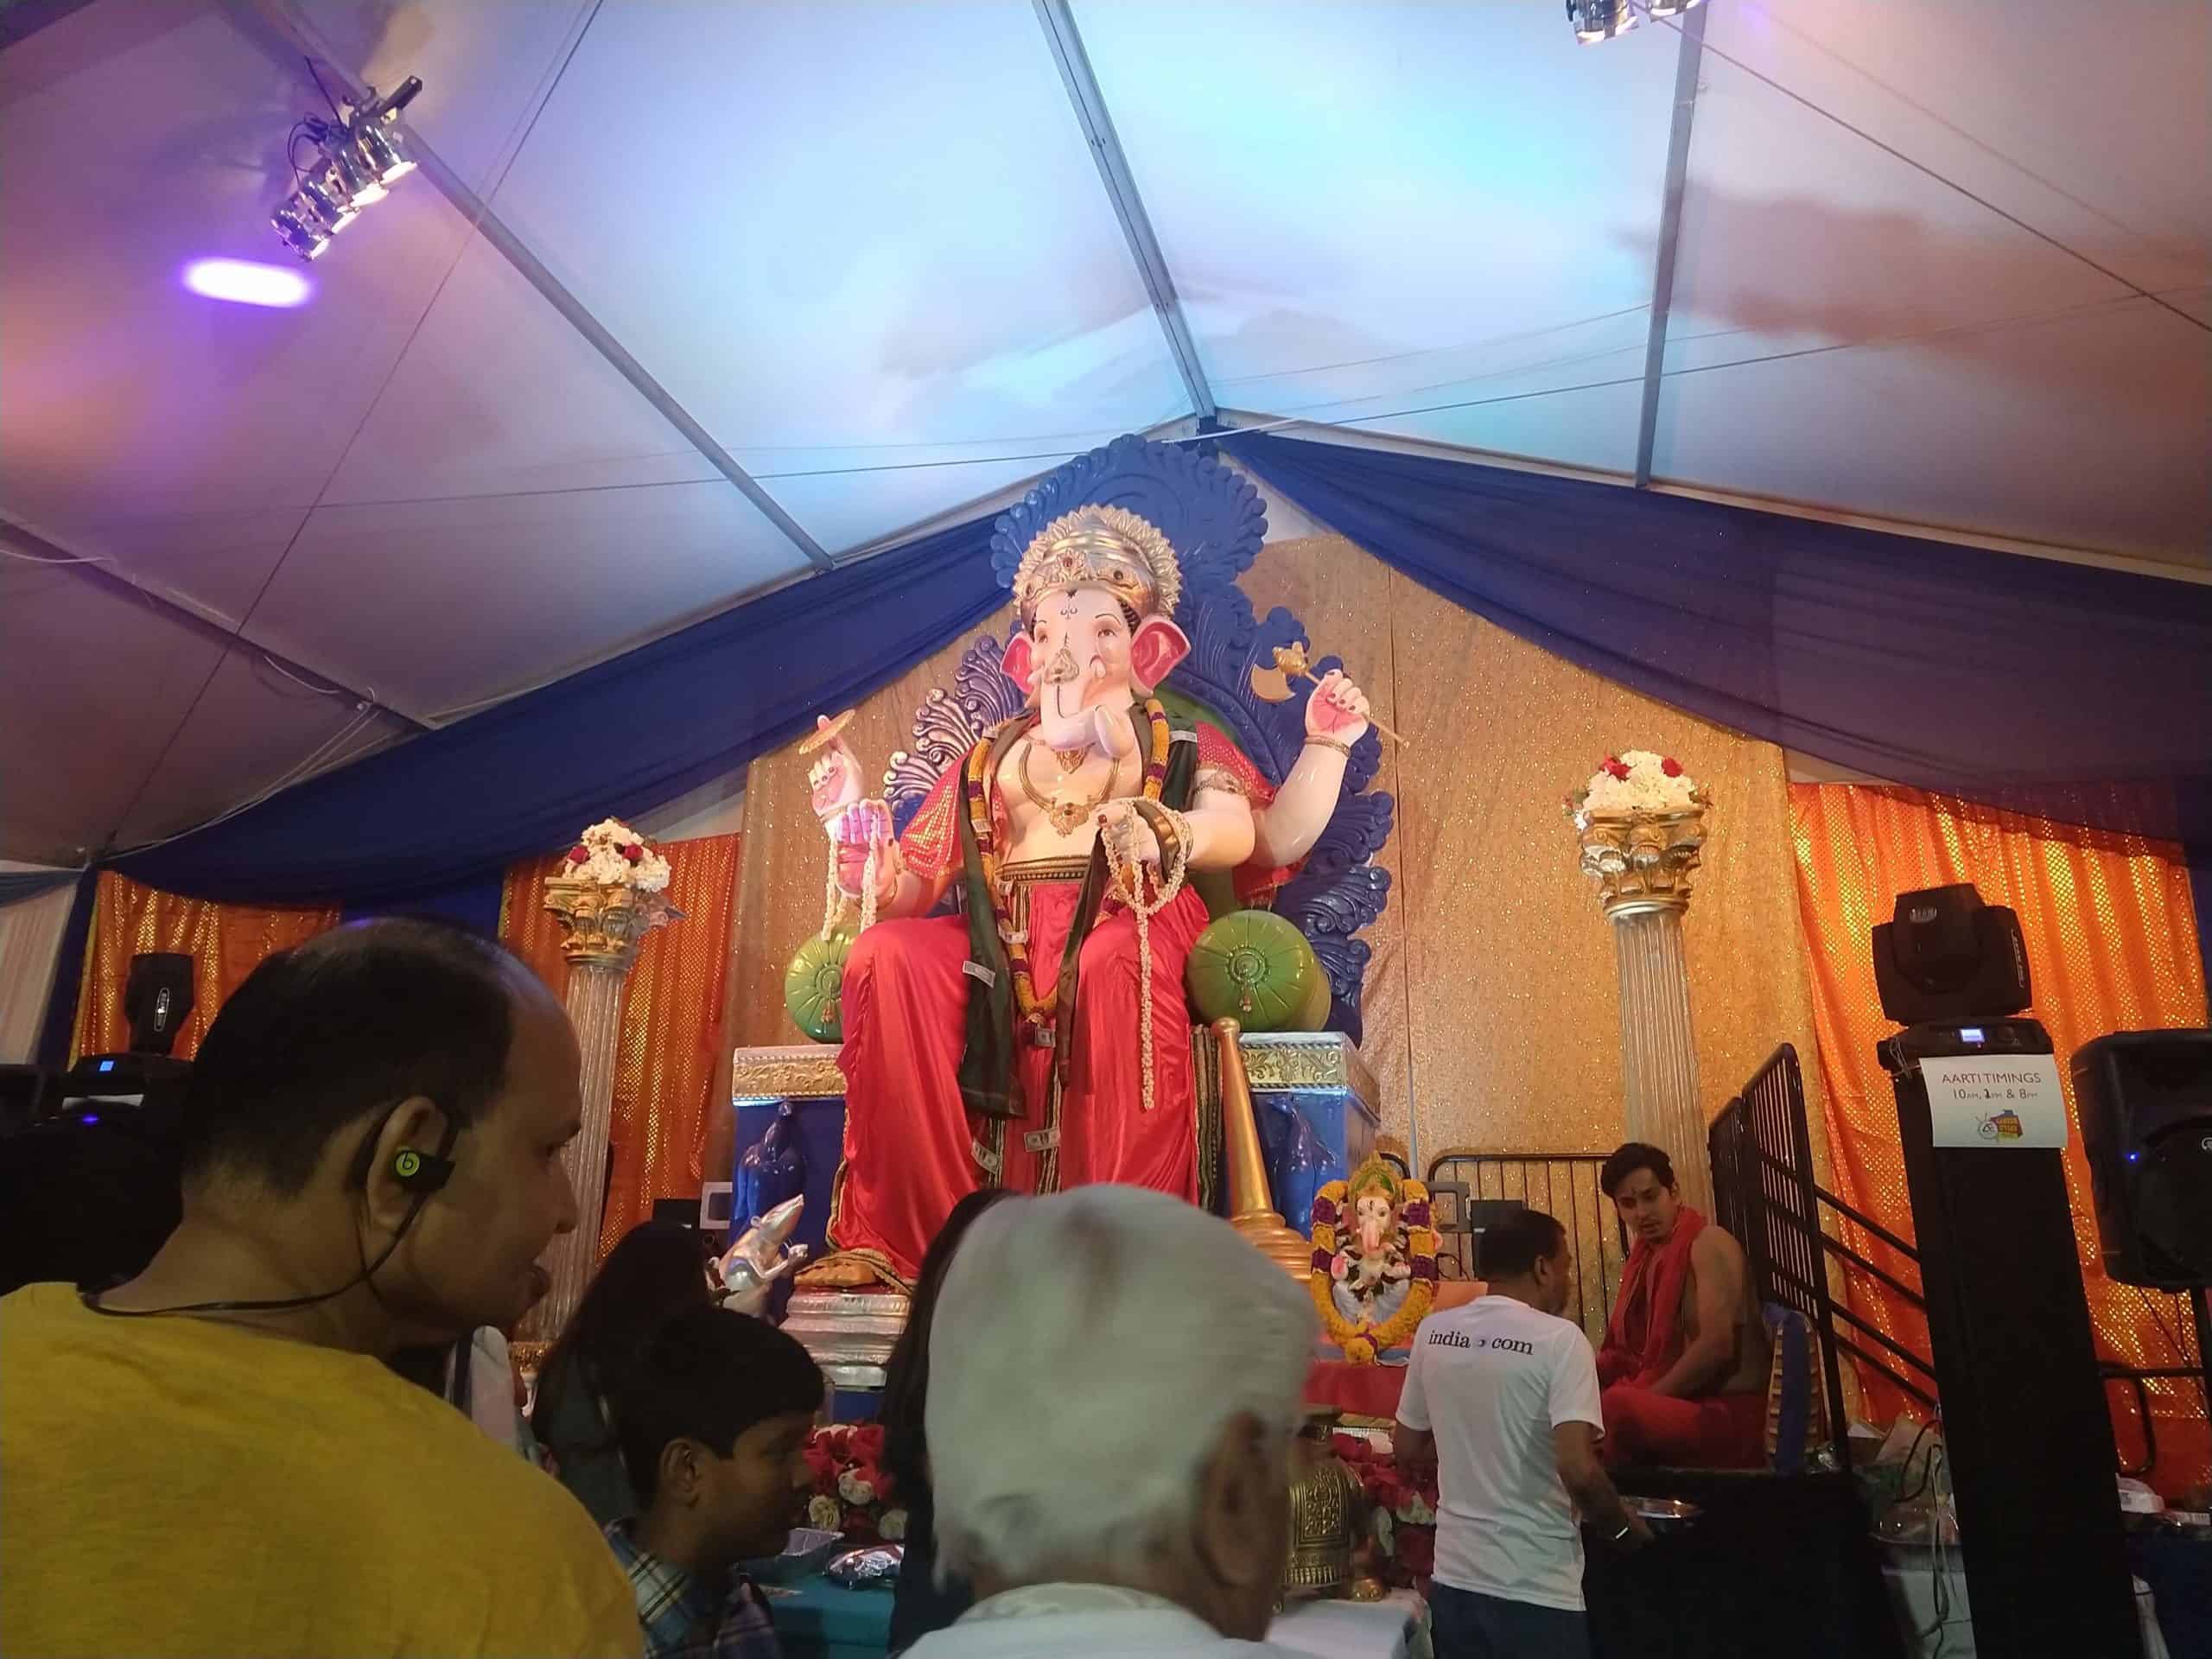 Best things to do in Jersey City New Jersey Julia Menez - Ganesh Chaturthi Festival elephant statue